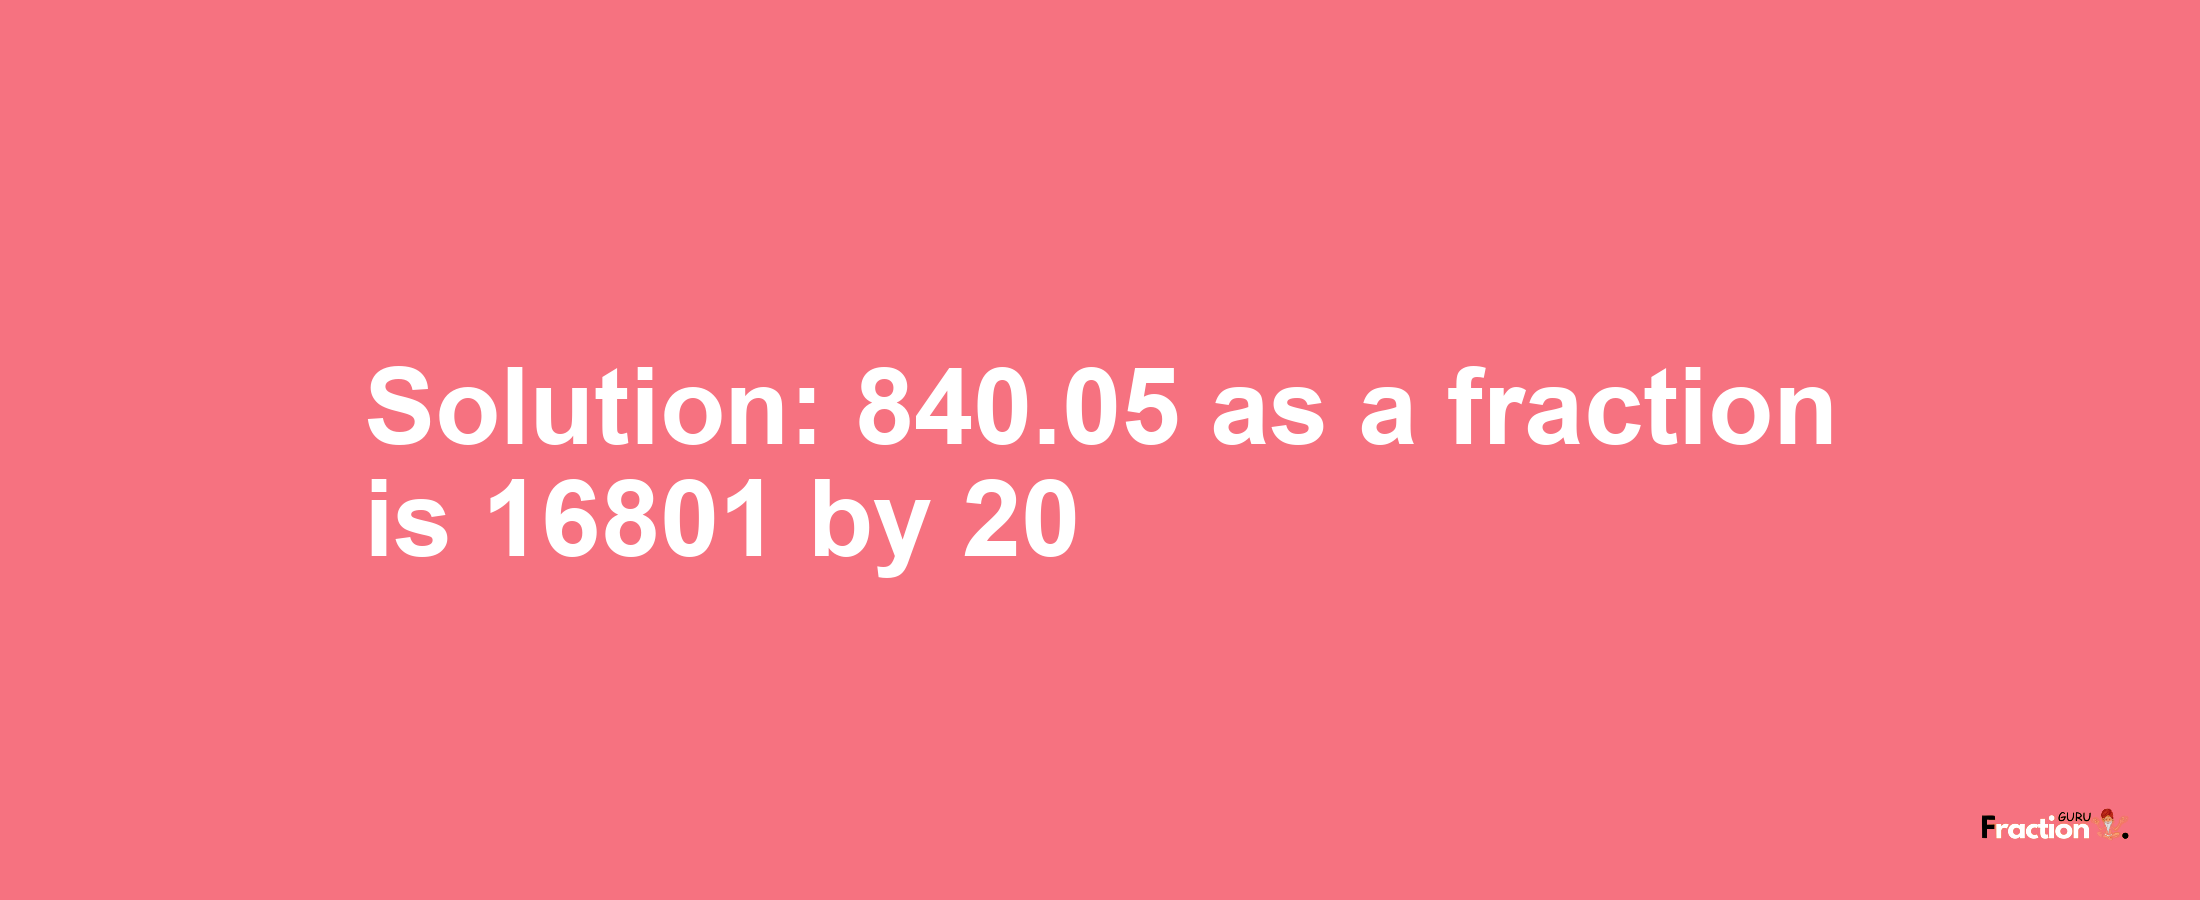 Solution:840.05 as a fraction is 16801/20